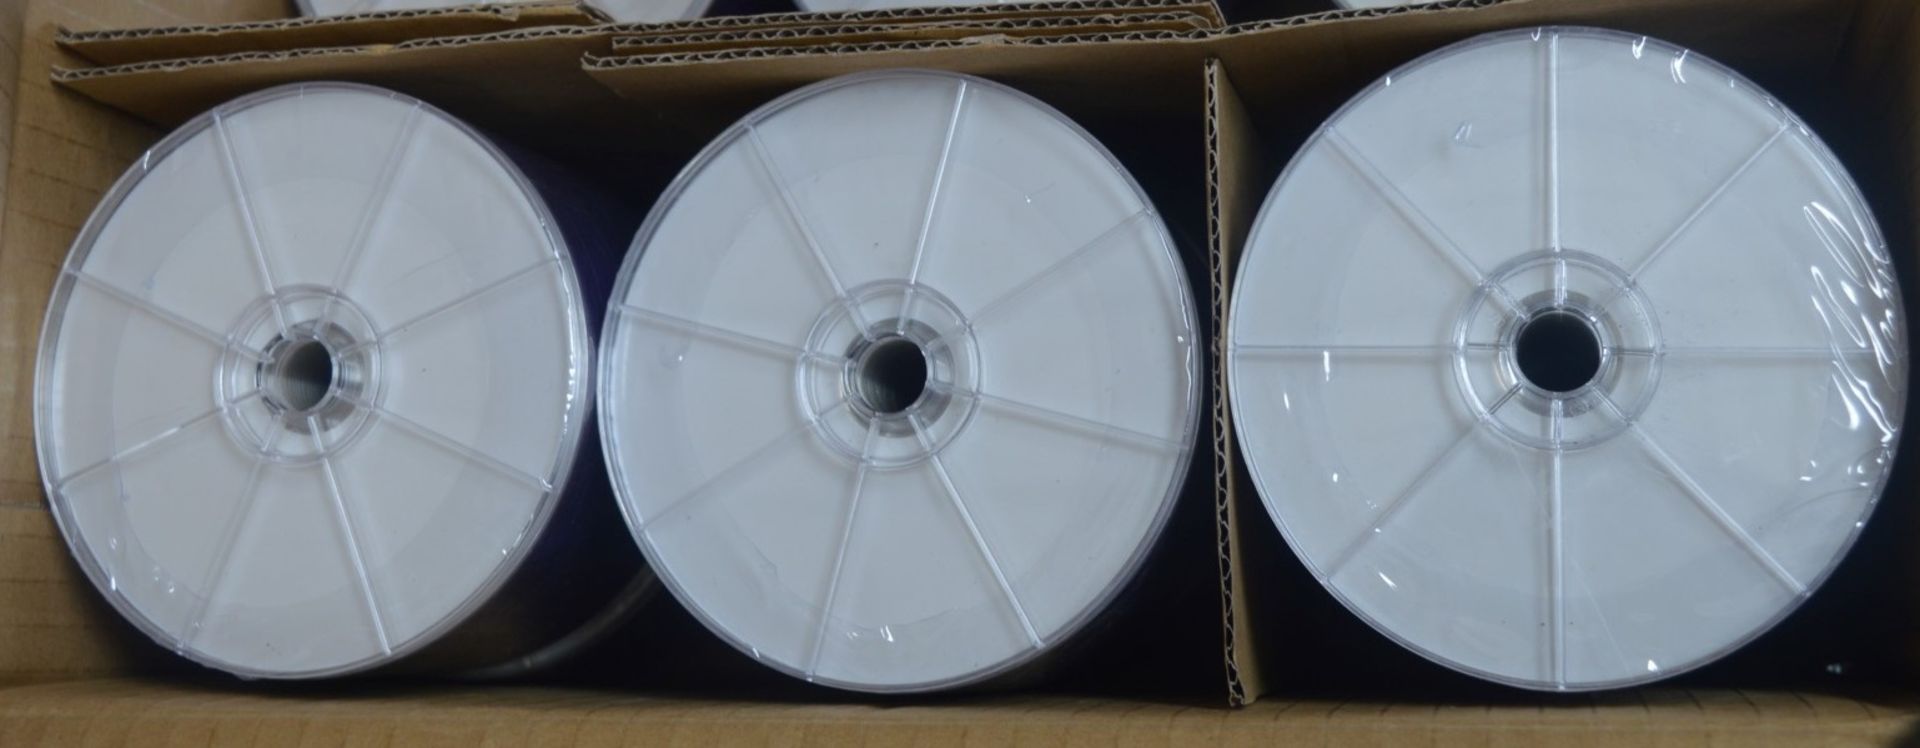 150 x Traxdata Full Surface Thermal Printable DVDR 8X Discs - Includes 3 x 4.7gb Cake of 50 - Image 4 of 4